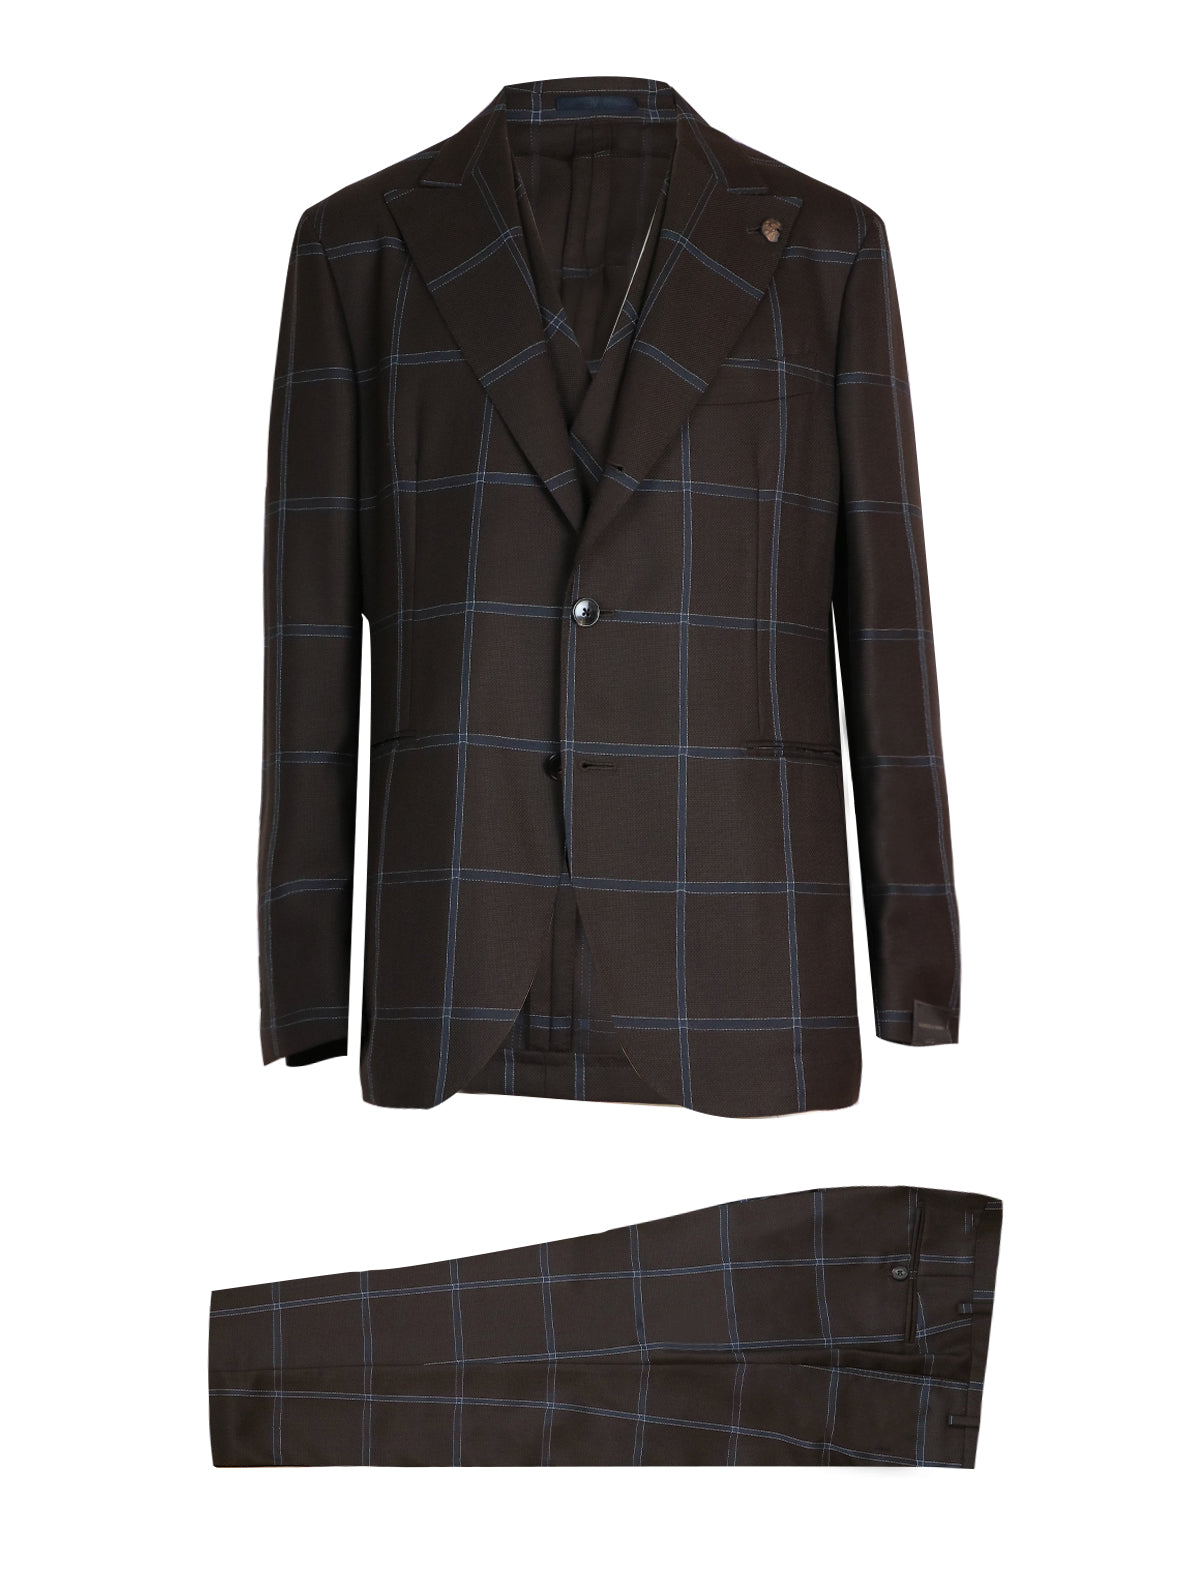 Gabriele Pasini Single-Breasted 3-Piece Suit Set in Brown/Blue Checks